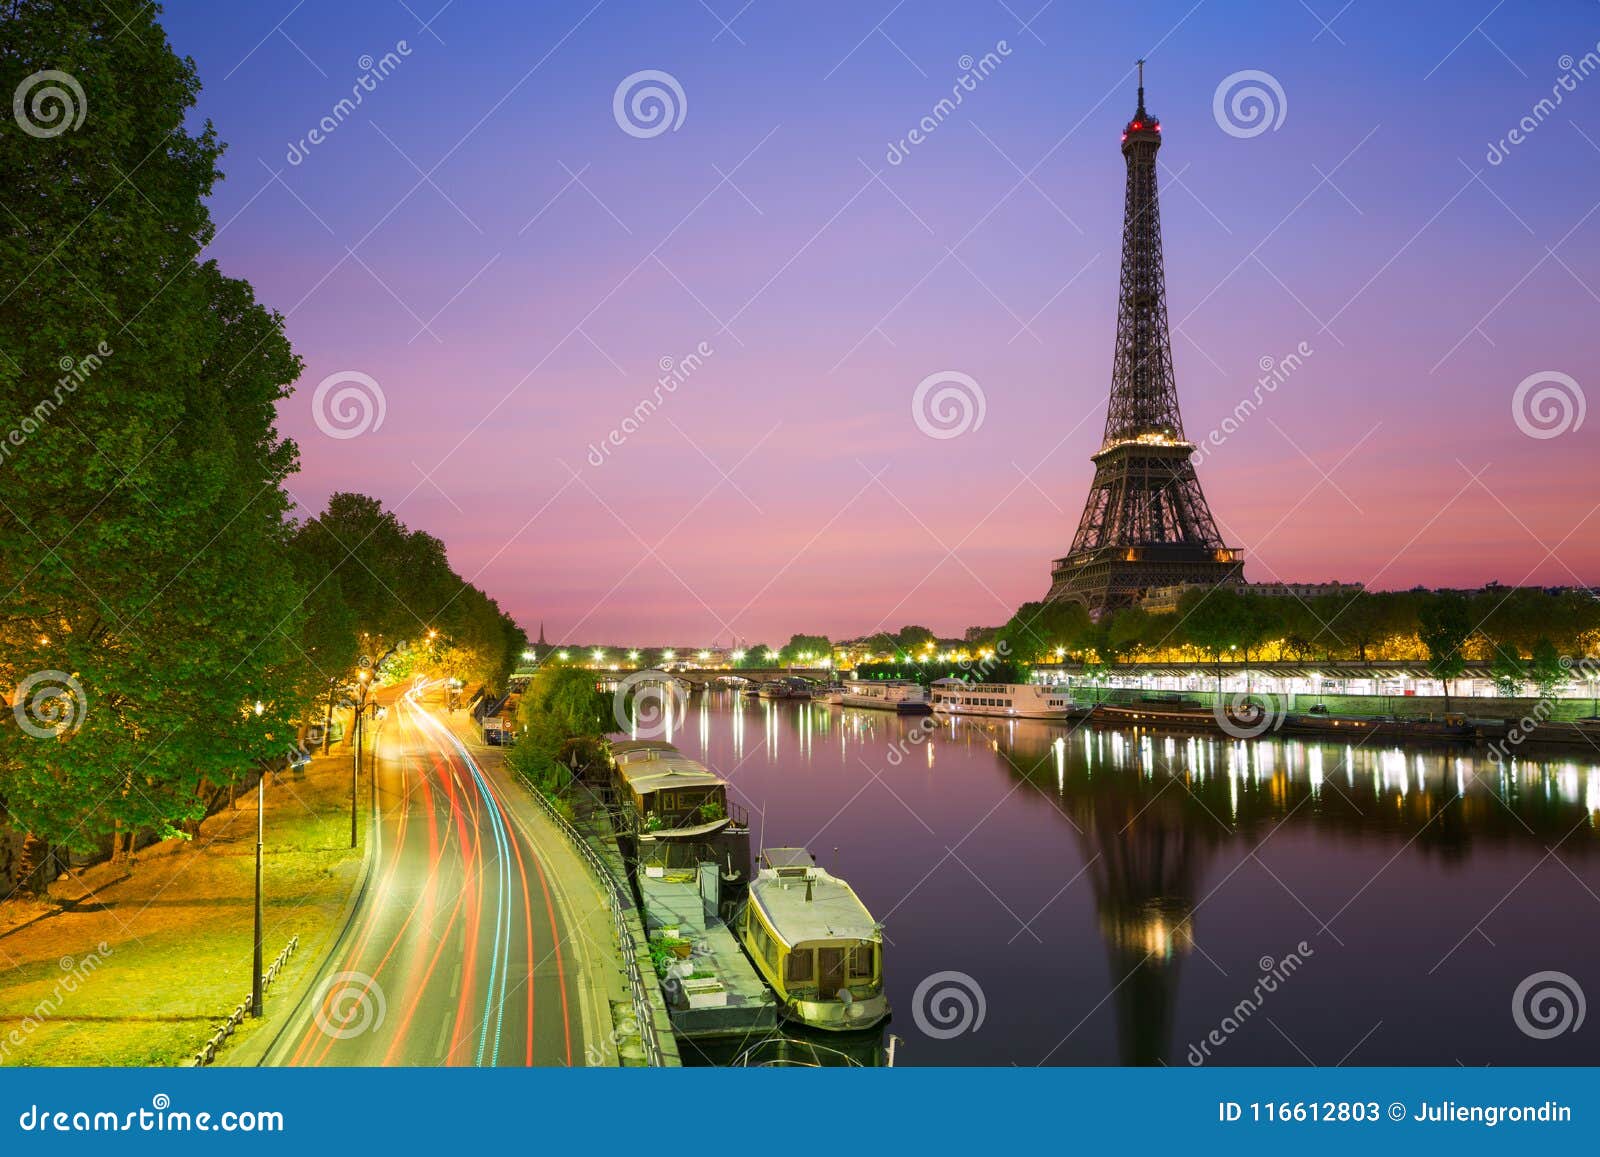 Eiffel Tower Paris At Dusk Editorial Stock Photo Image Of Monument